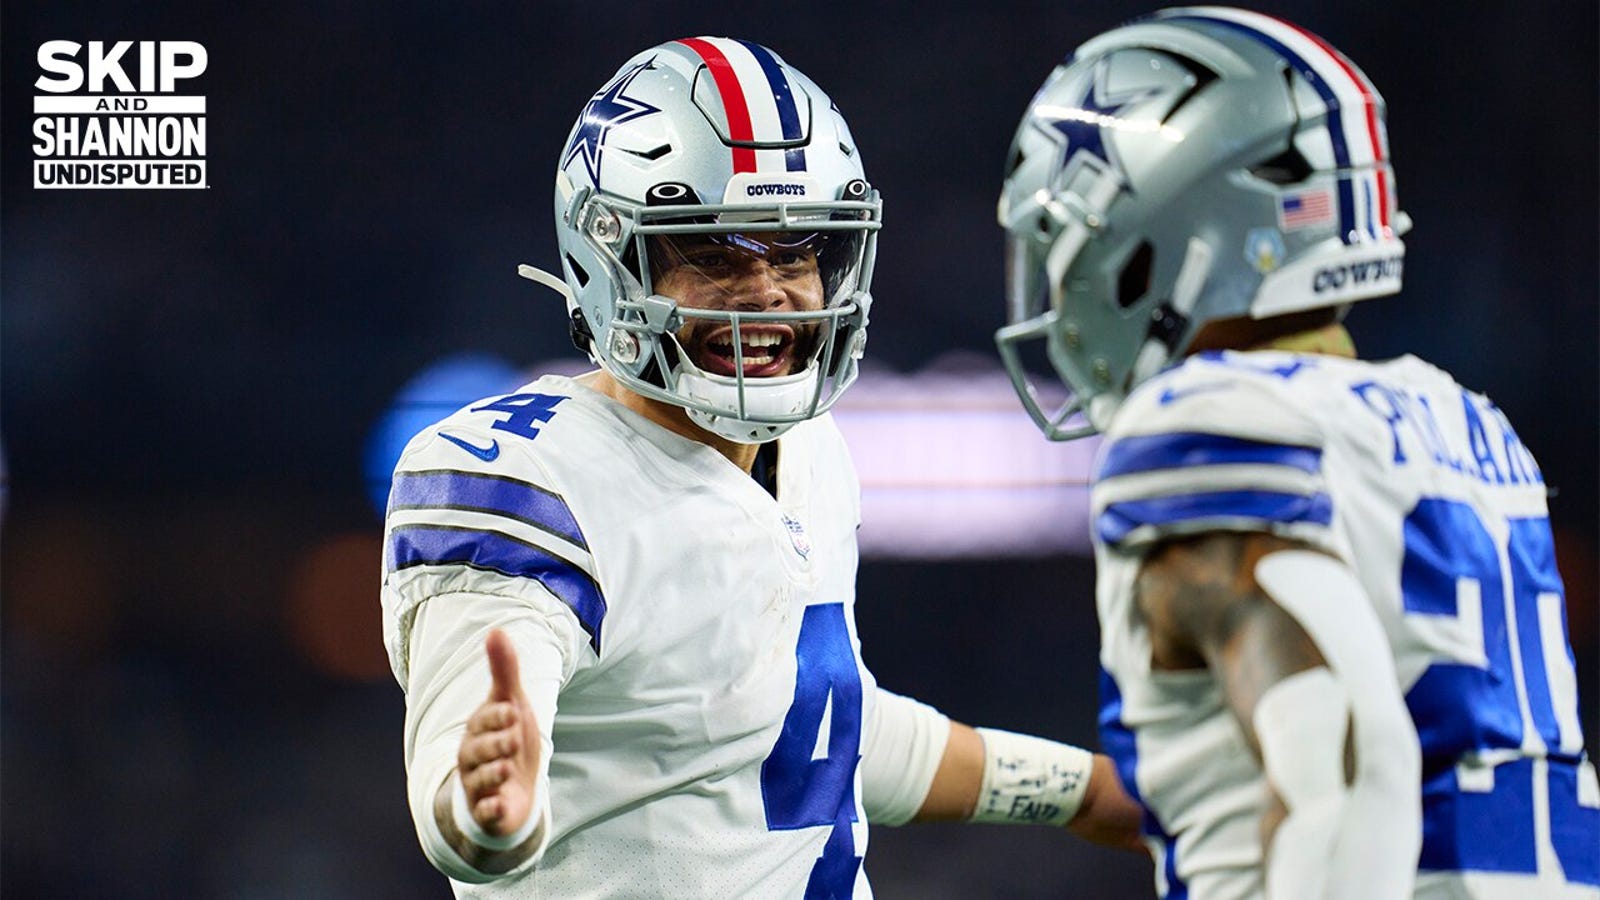 Latest projections give Cowboys 29 percent chance of winning Super Bowl